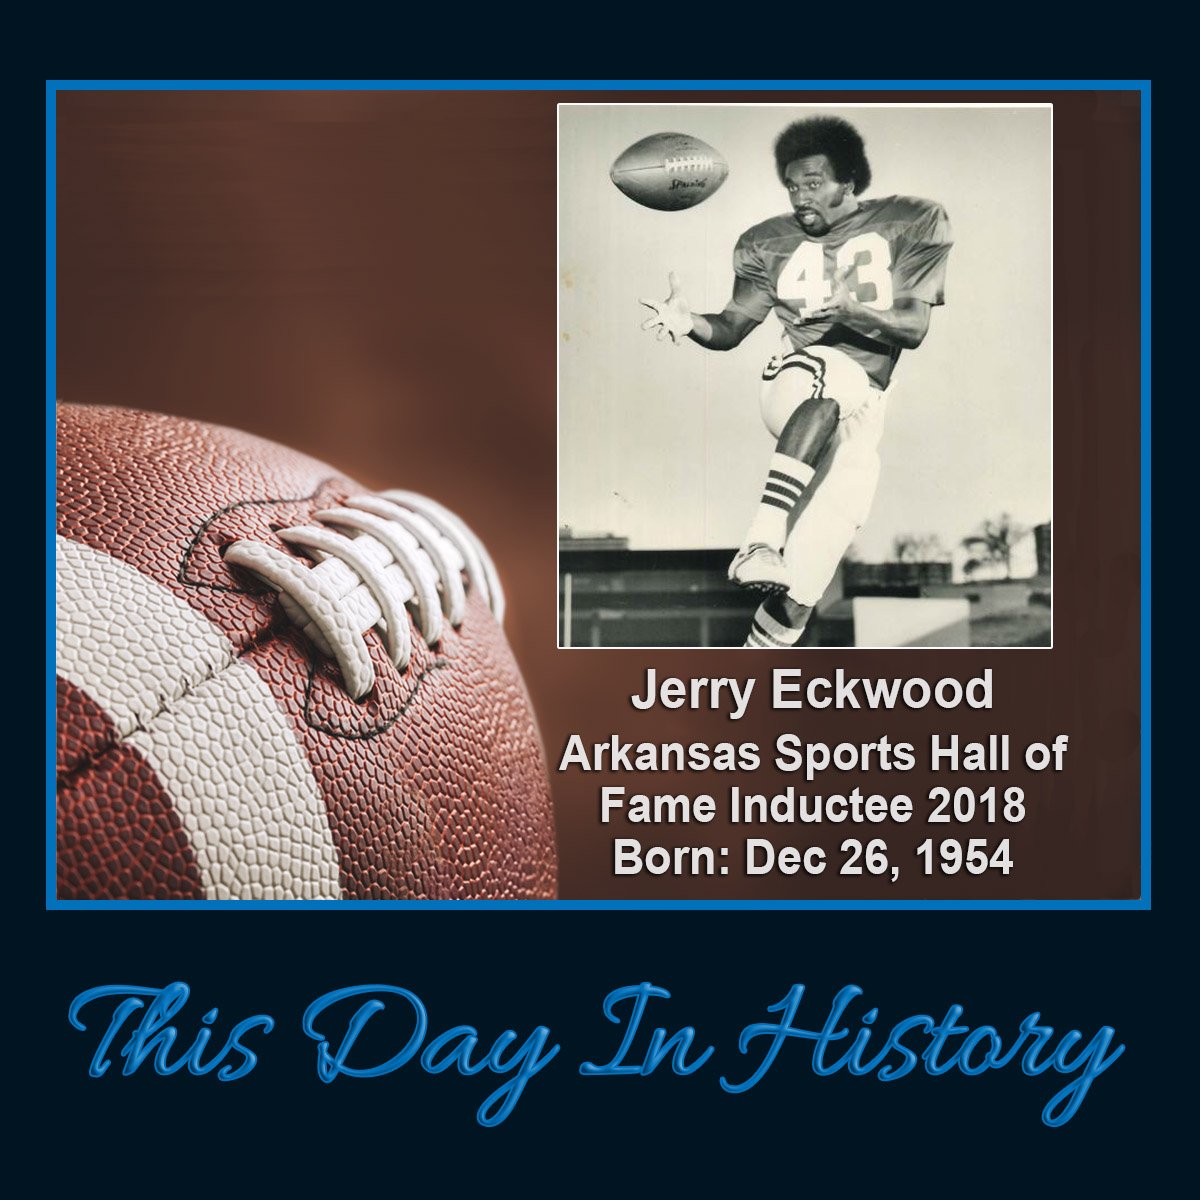 Jerry lettered at the U of A from 1975 to 1978. He was drafted in the 3rd round by Tampa Bay and become their second leading rusher. ASHOF Inductee in 2018. @RazorbackFB @Buccaneers